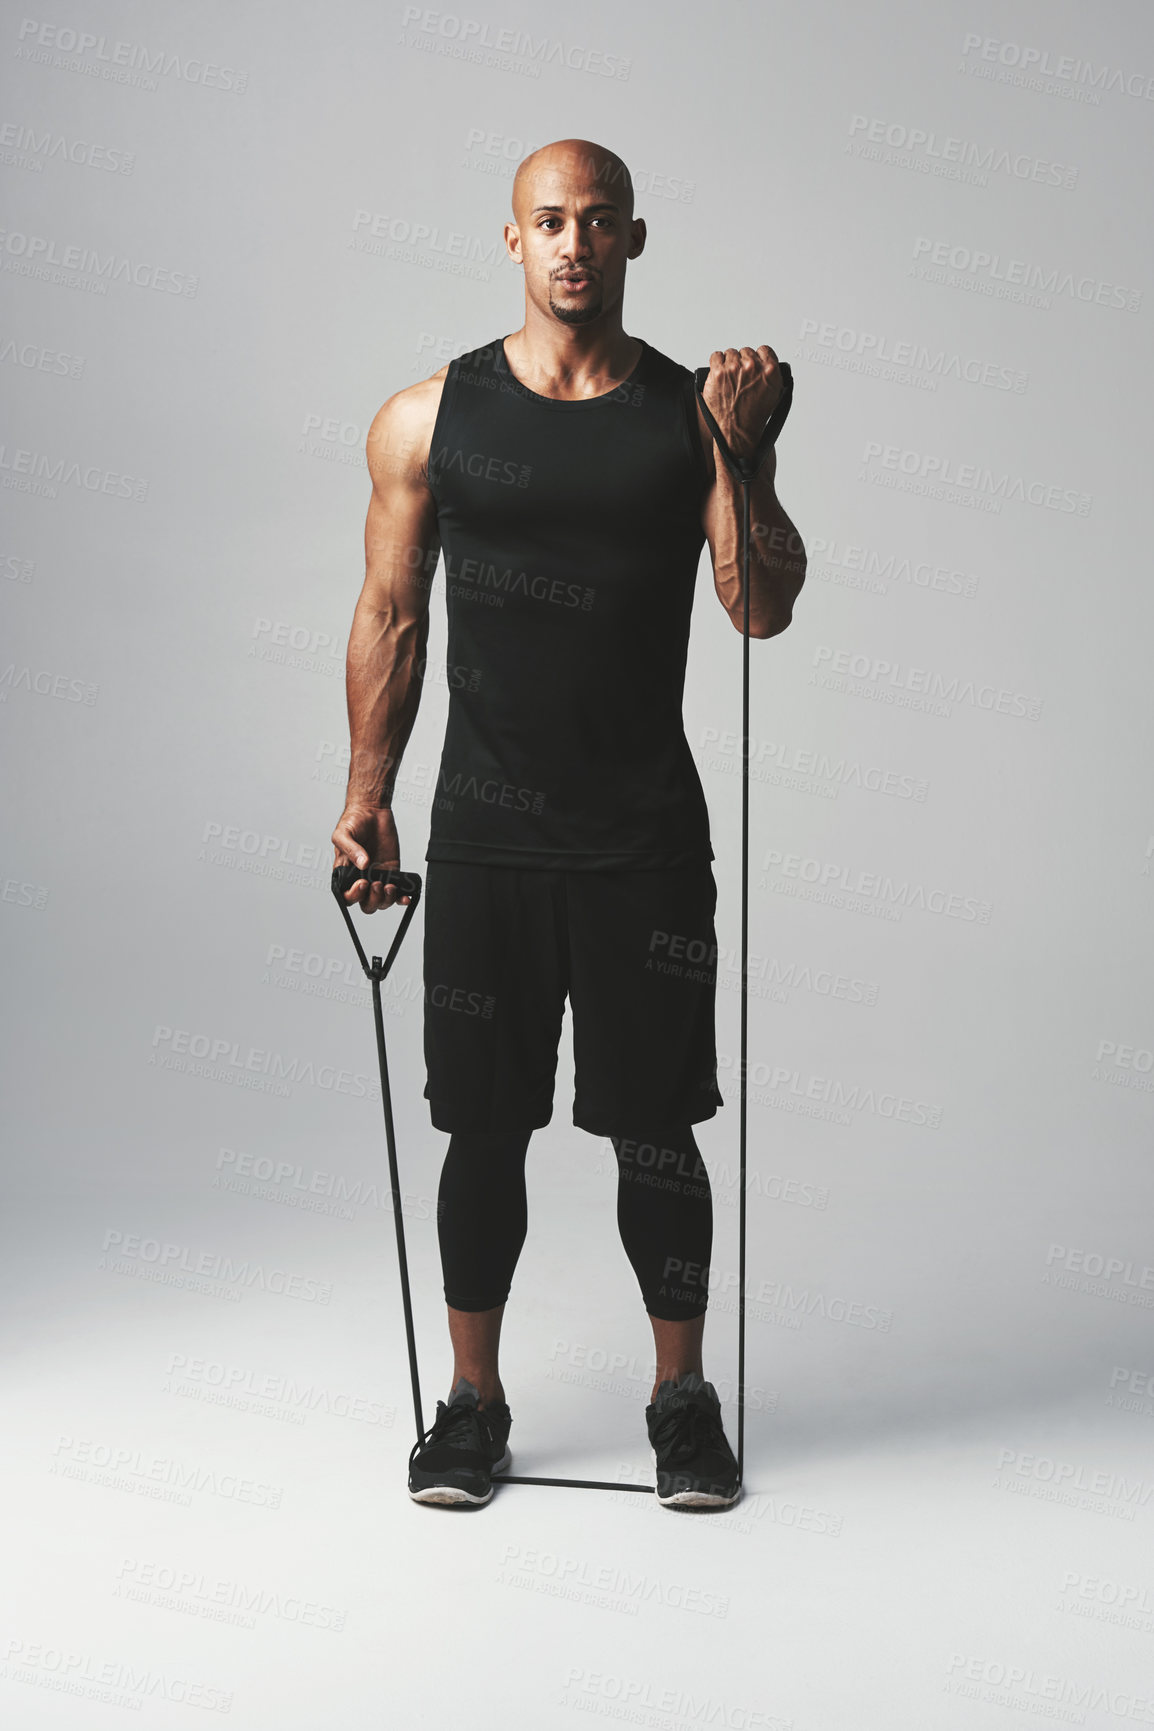 Buy stock photo Studio portrait of an athletic young man working out with a resistance band against a grey background